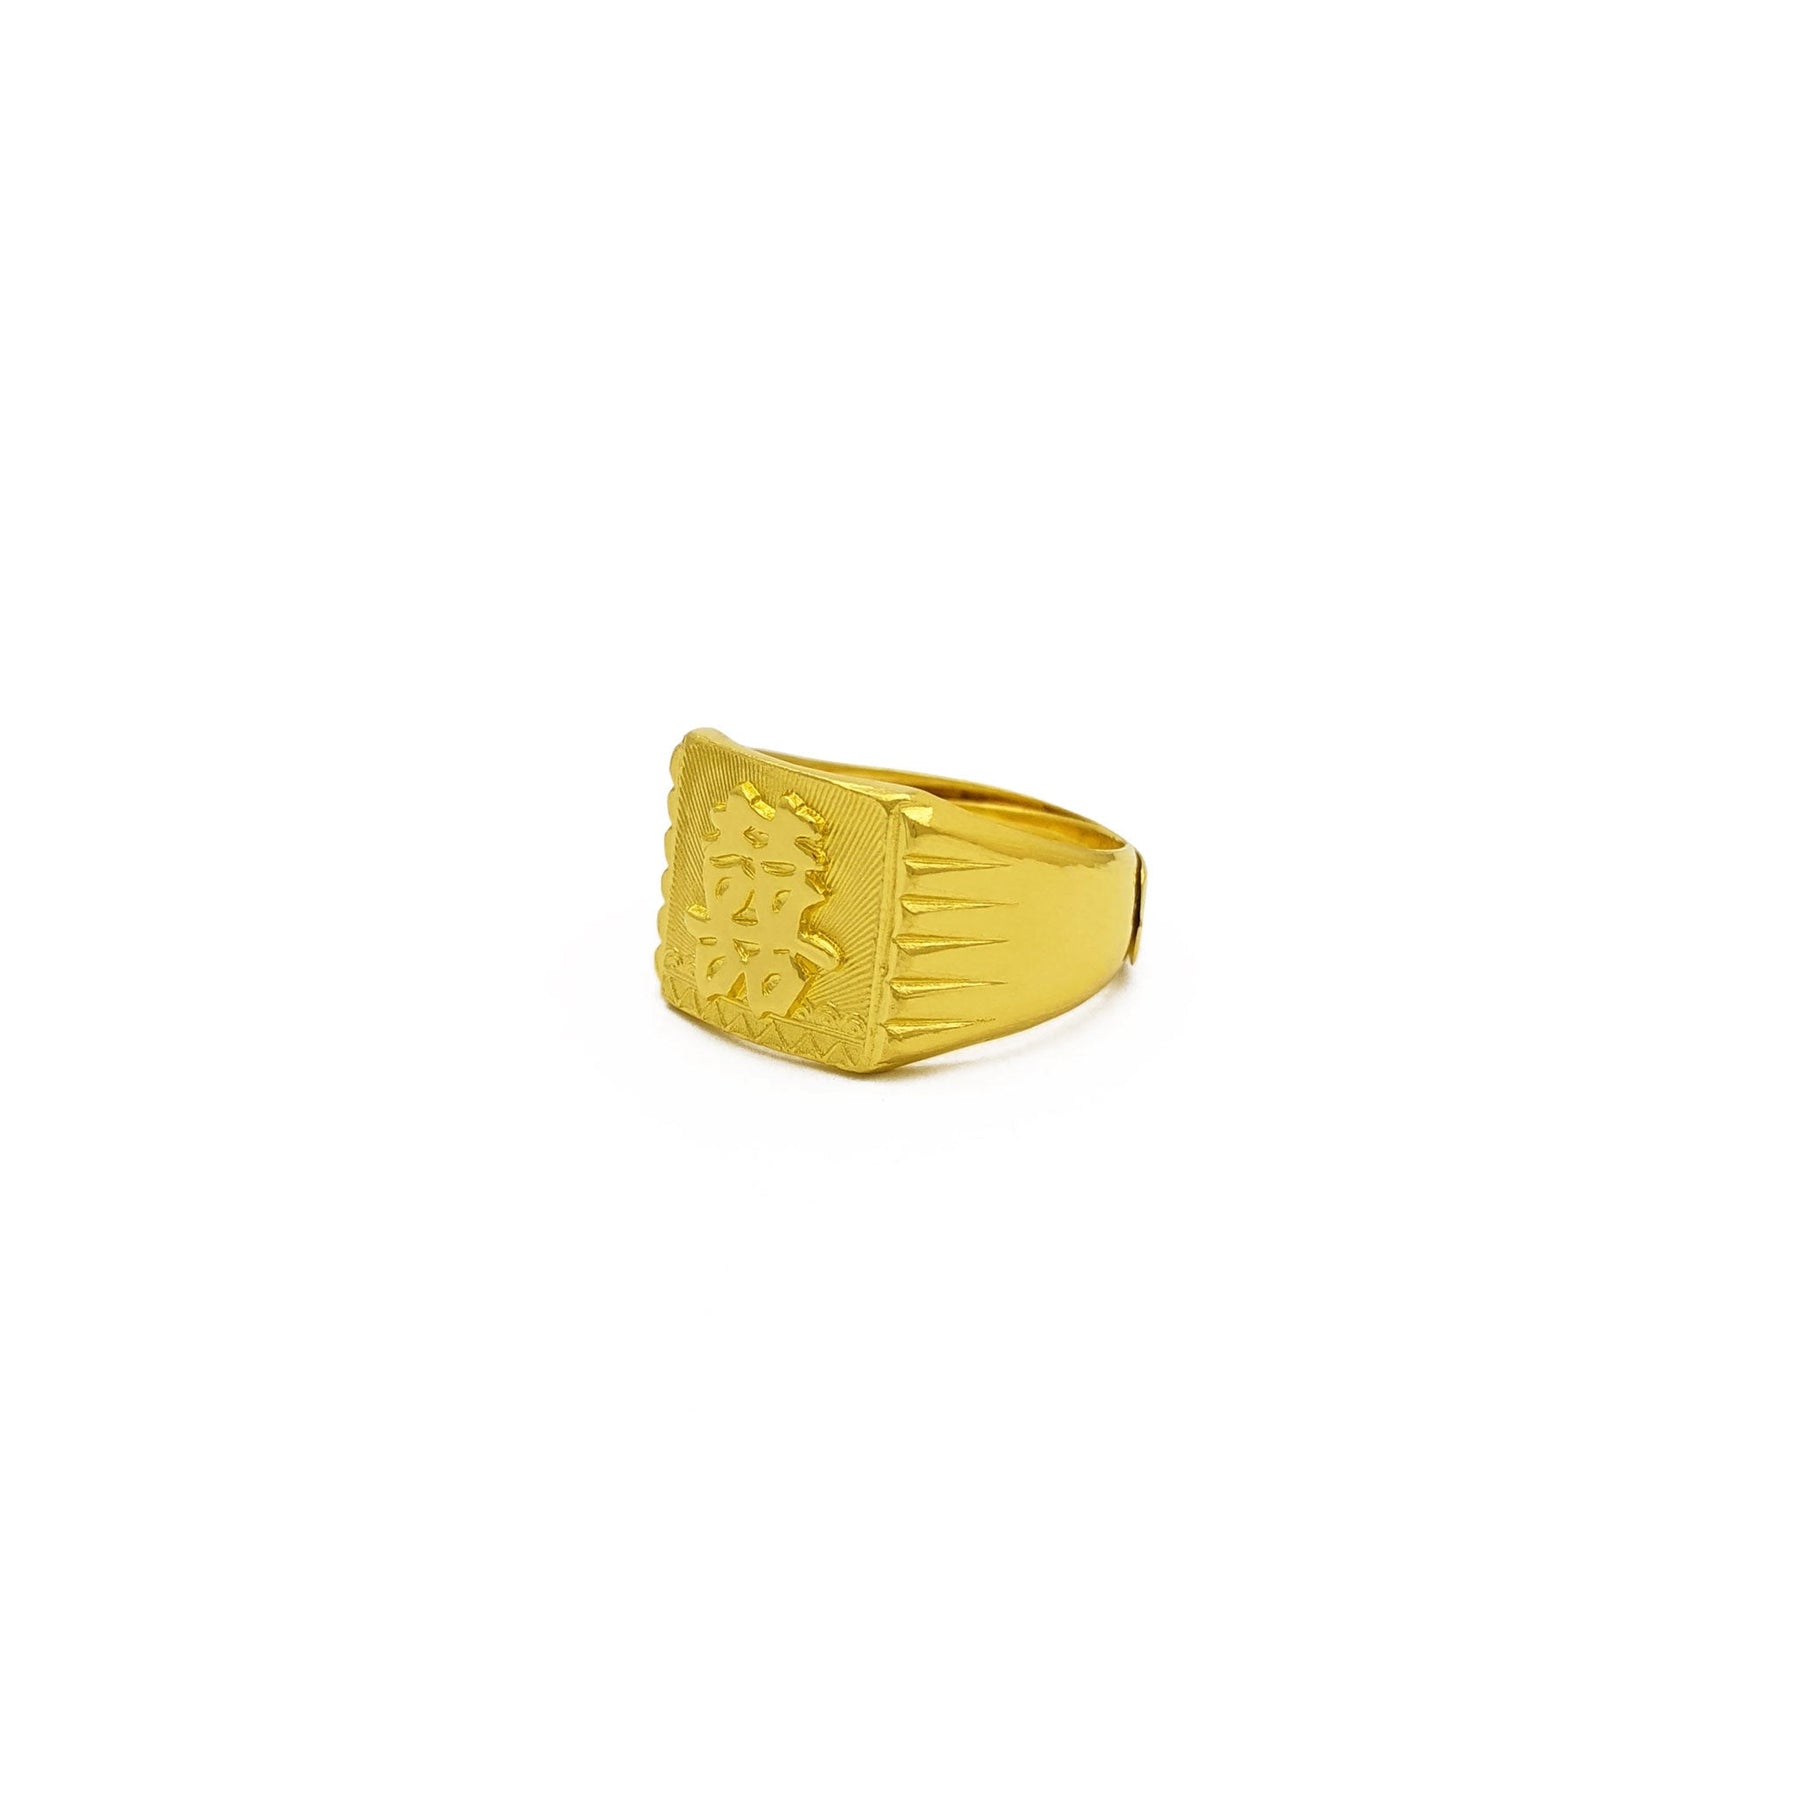 Authentic gold ring 9999 pure gold men's and women's models square ring to  attract wealth and